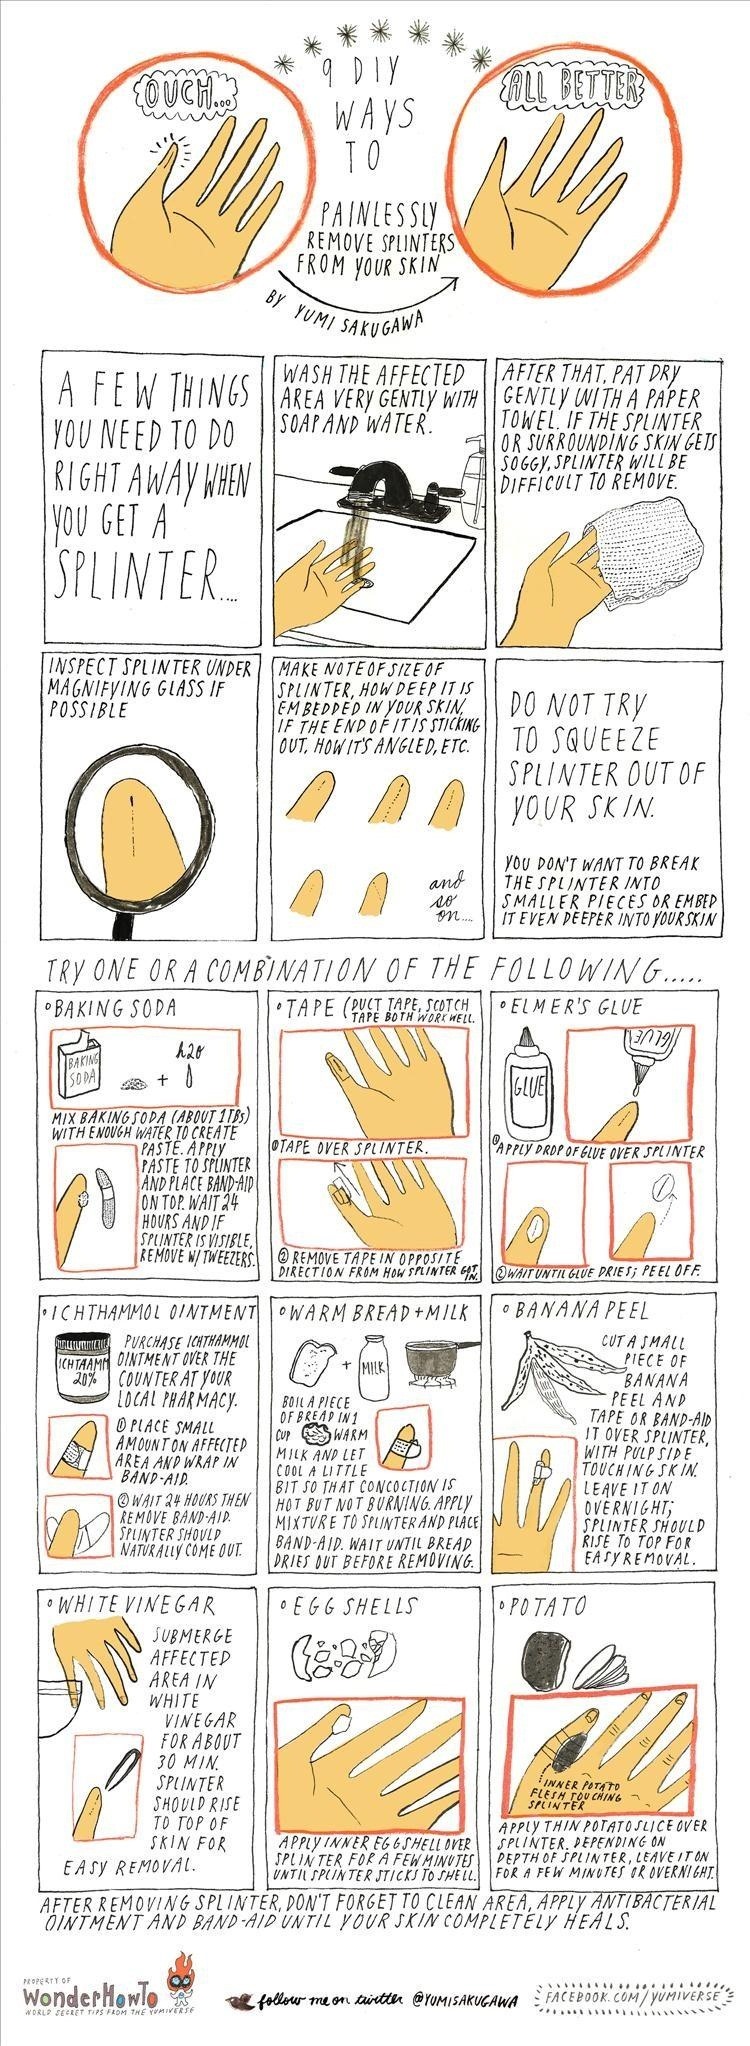 9 diy ways painlessly remove splinters from your skin.w1456